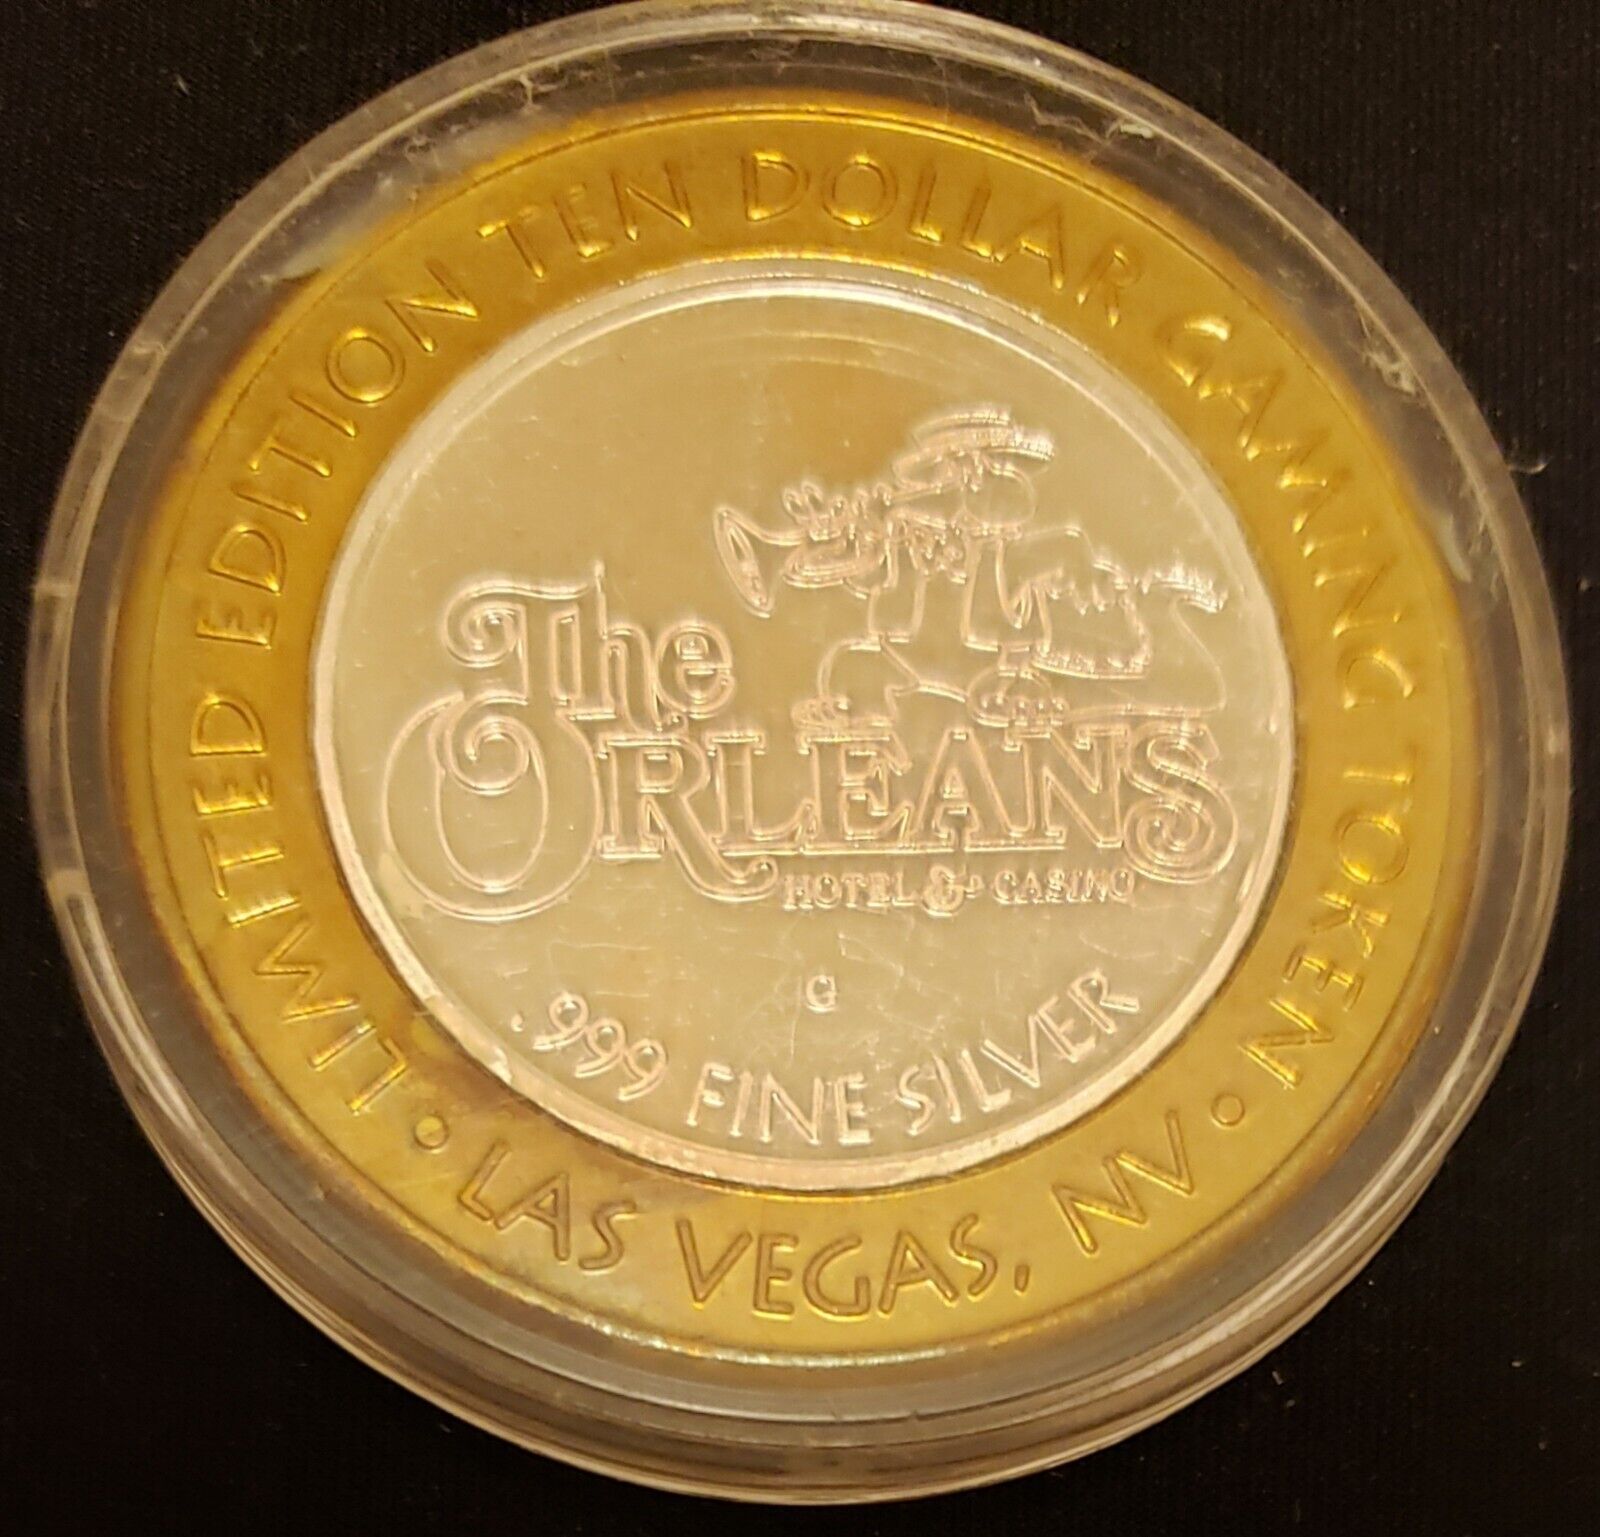 The Orleans Casino $10 Gaming Token Limited Edition/.999 Fine Silver  Без бренда